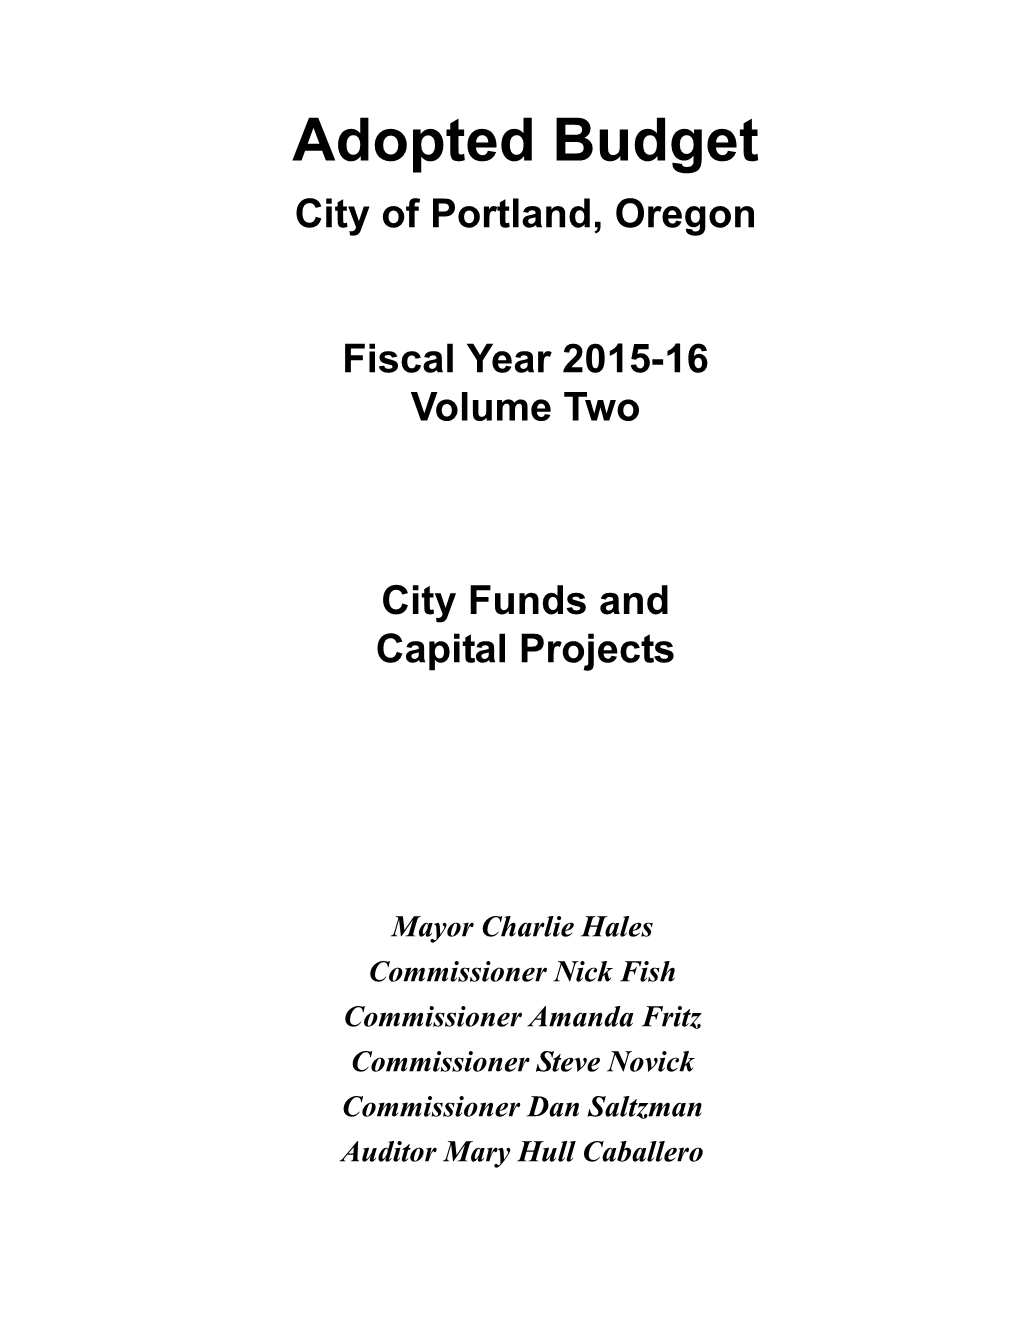 City Funds & Capital Projects